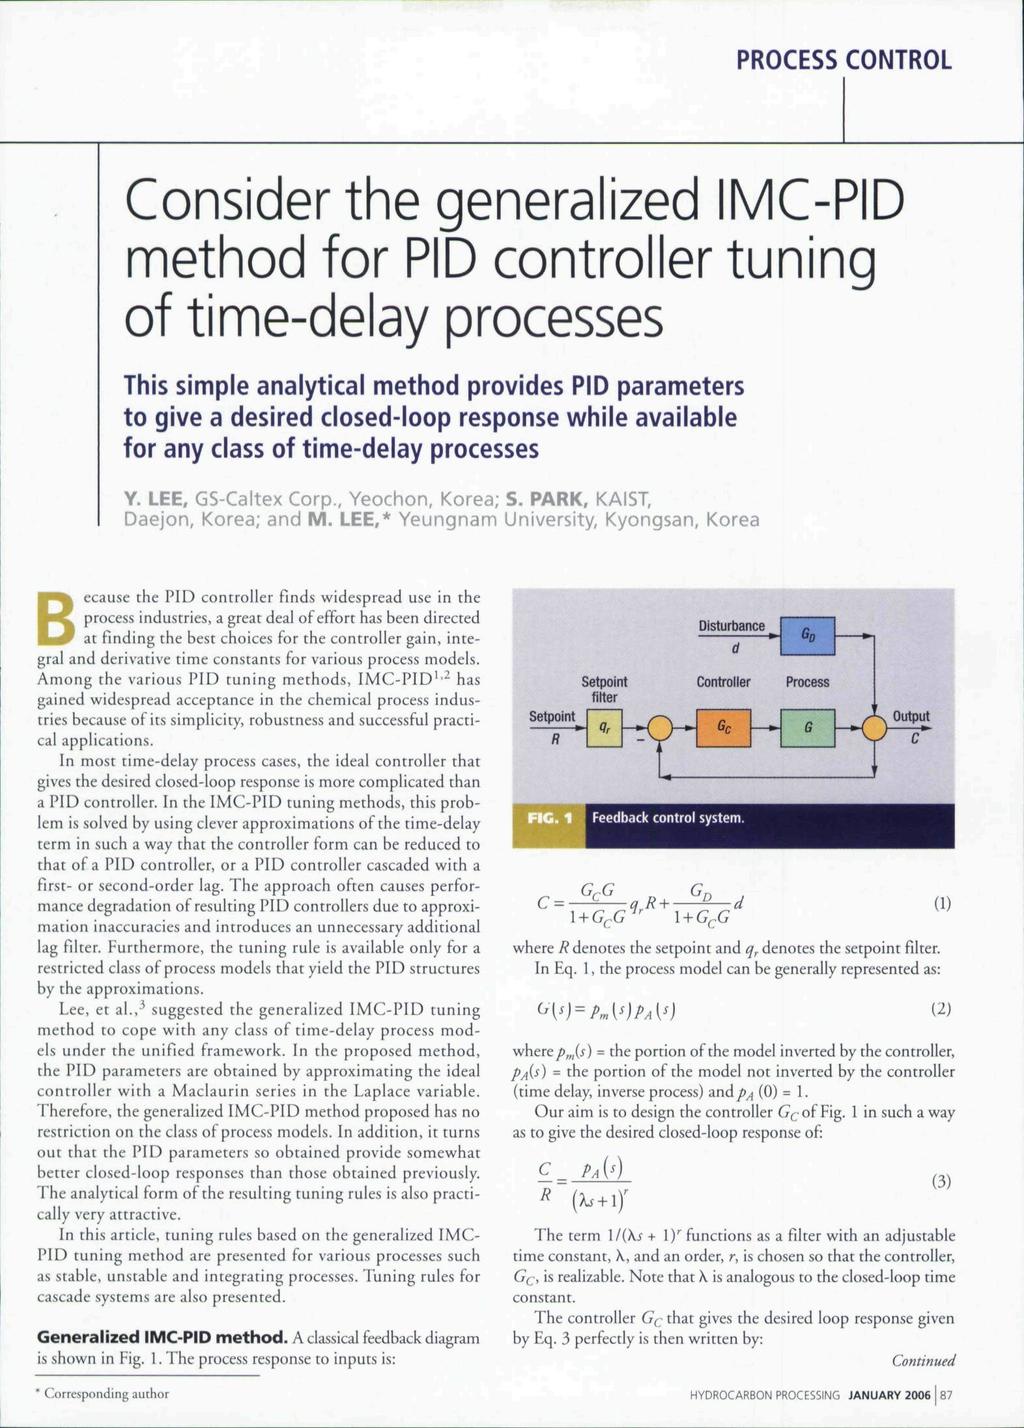 Consider the generalized IMC-PID method for PID controller tuning of time-delay processes This simple analytical method provides PID parameters to give a desired closed-loop response while available